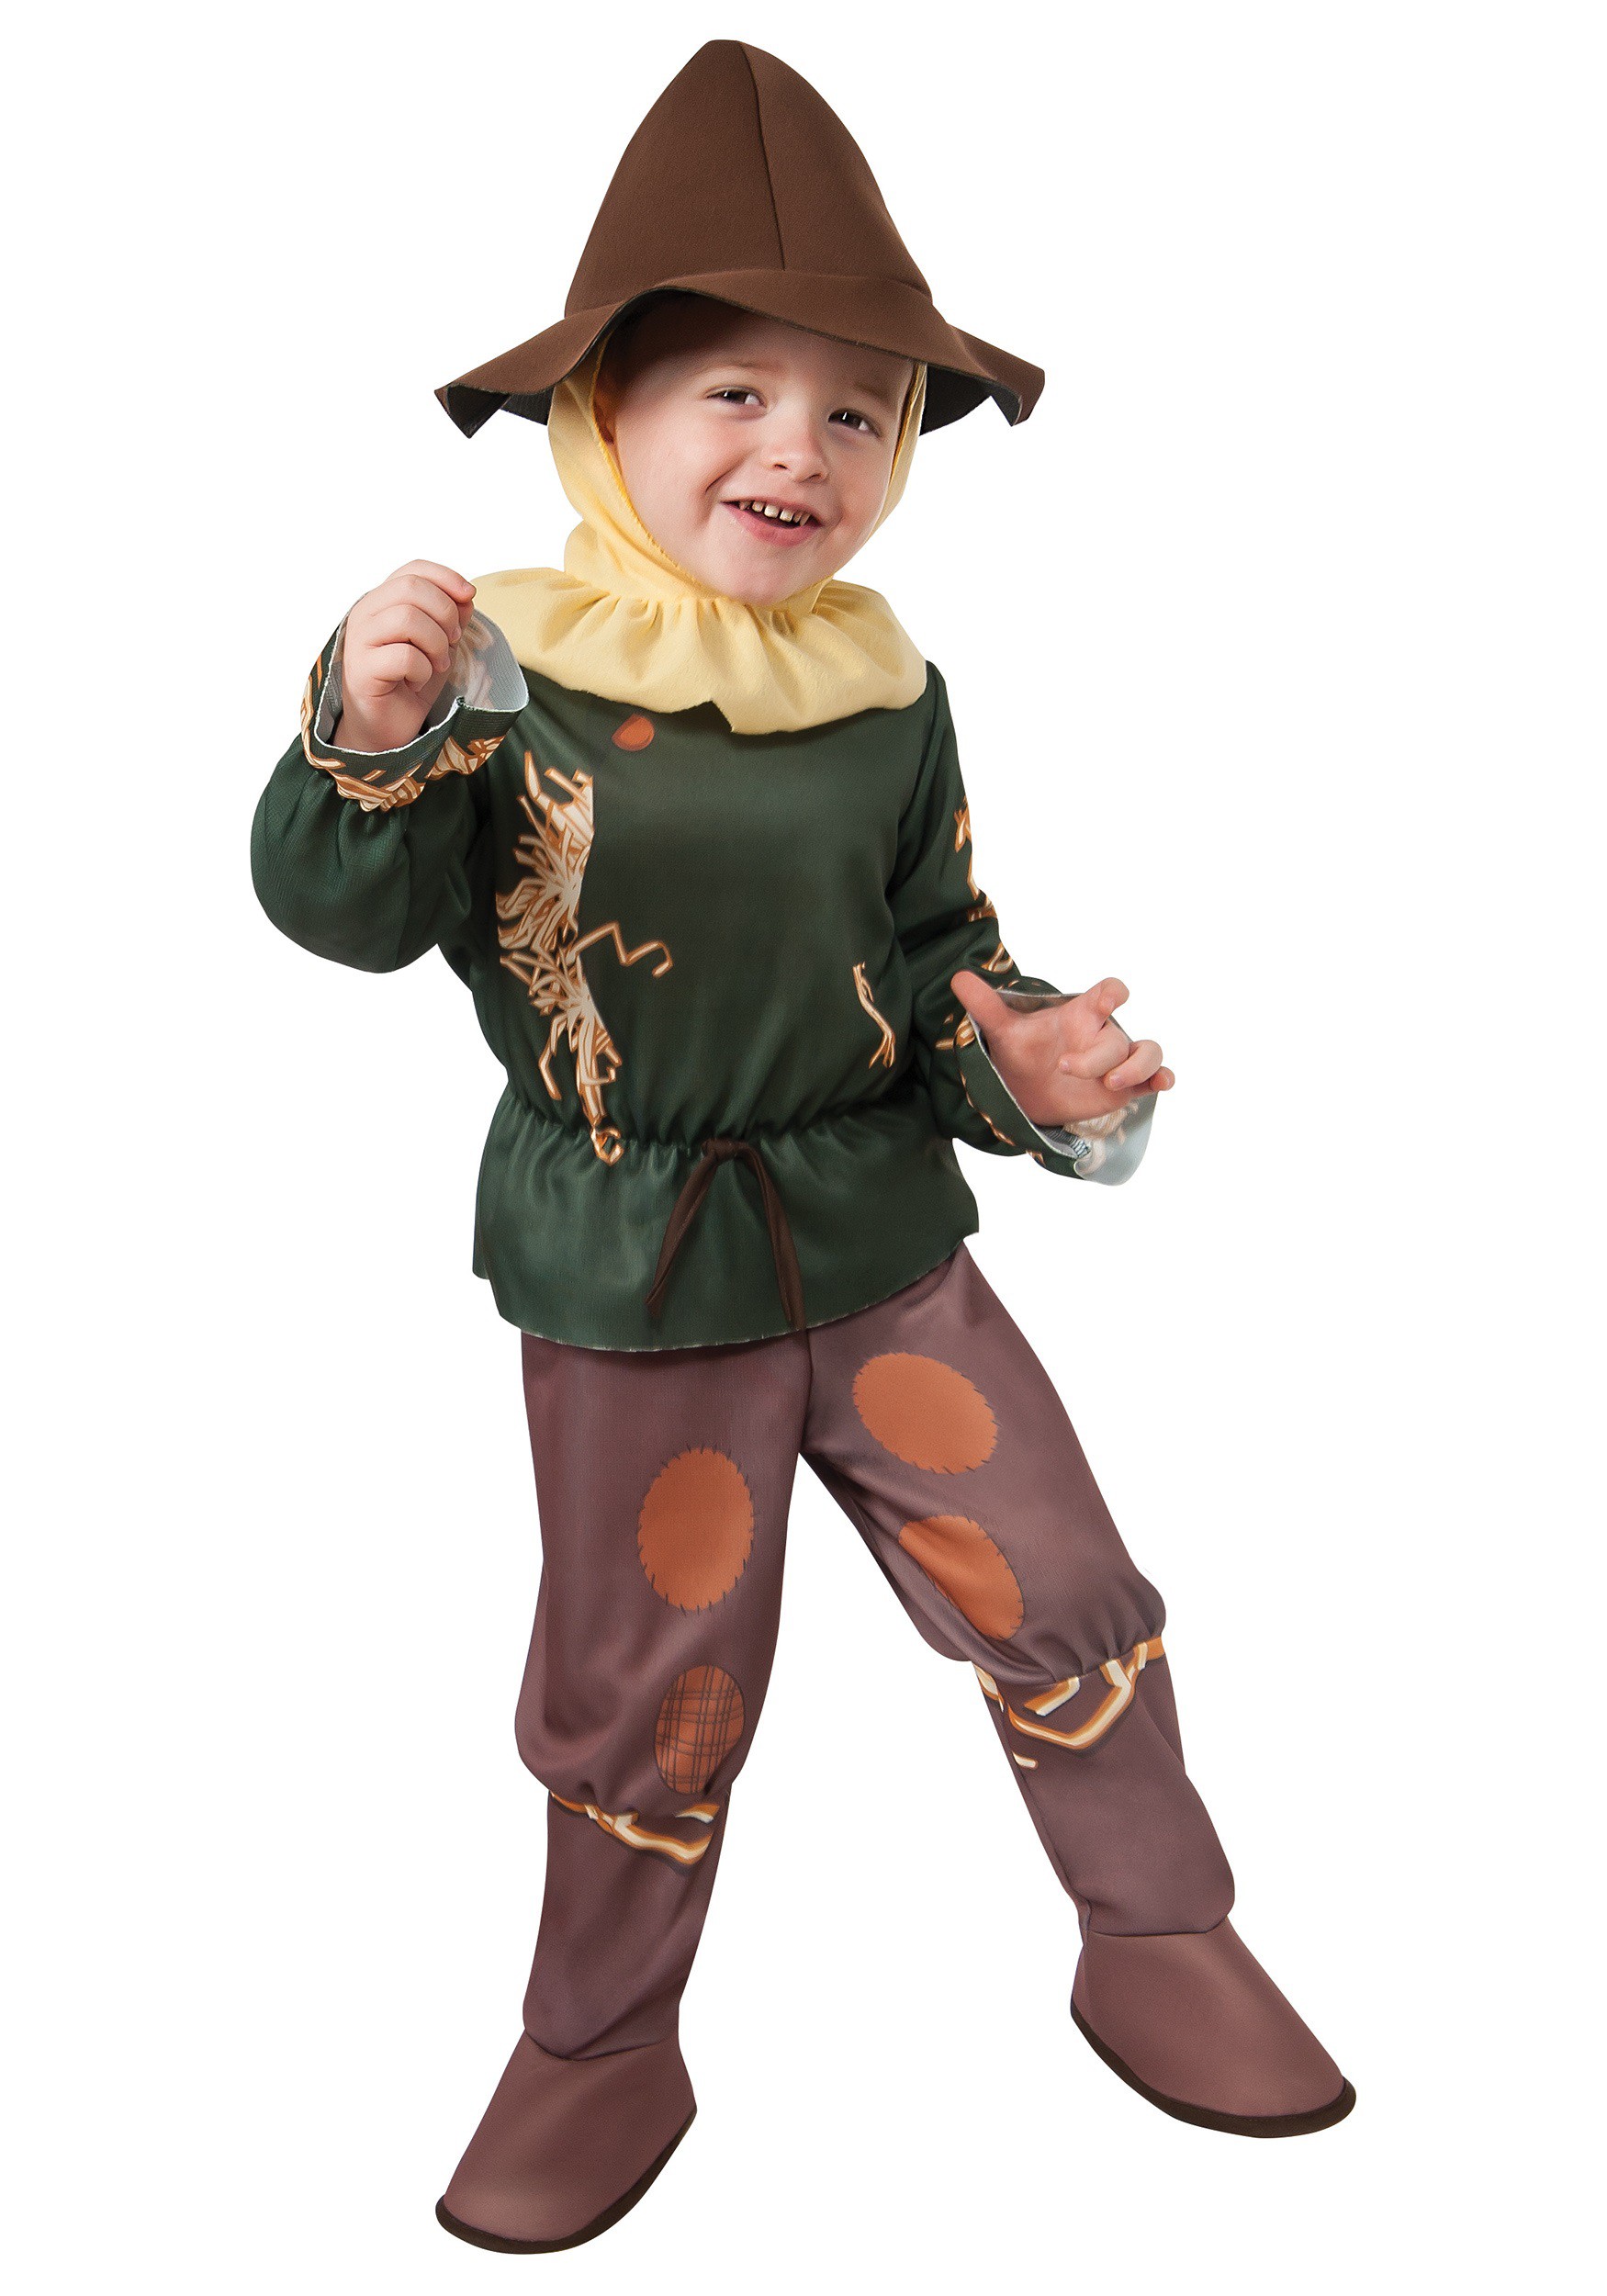 Rubies Costume Wizard Of Oz 75th Anniversary Edition Adult Scarecrow Costume